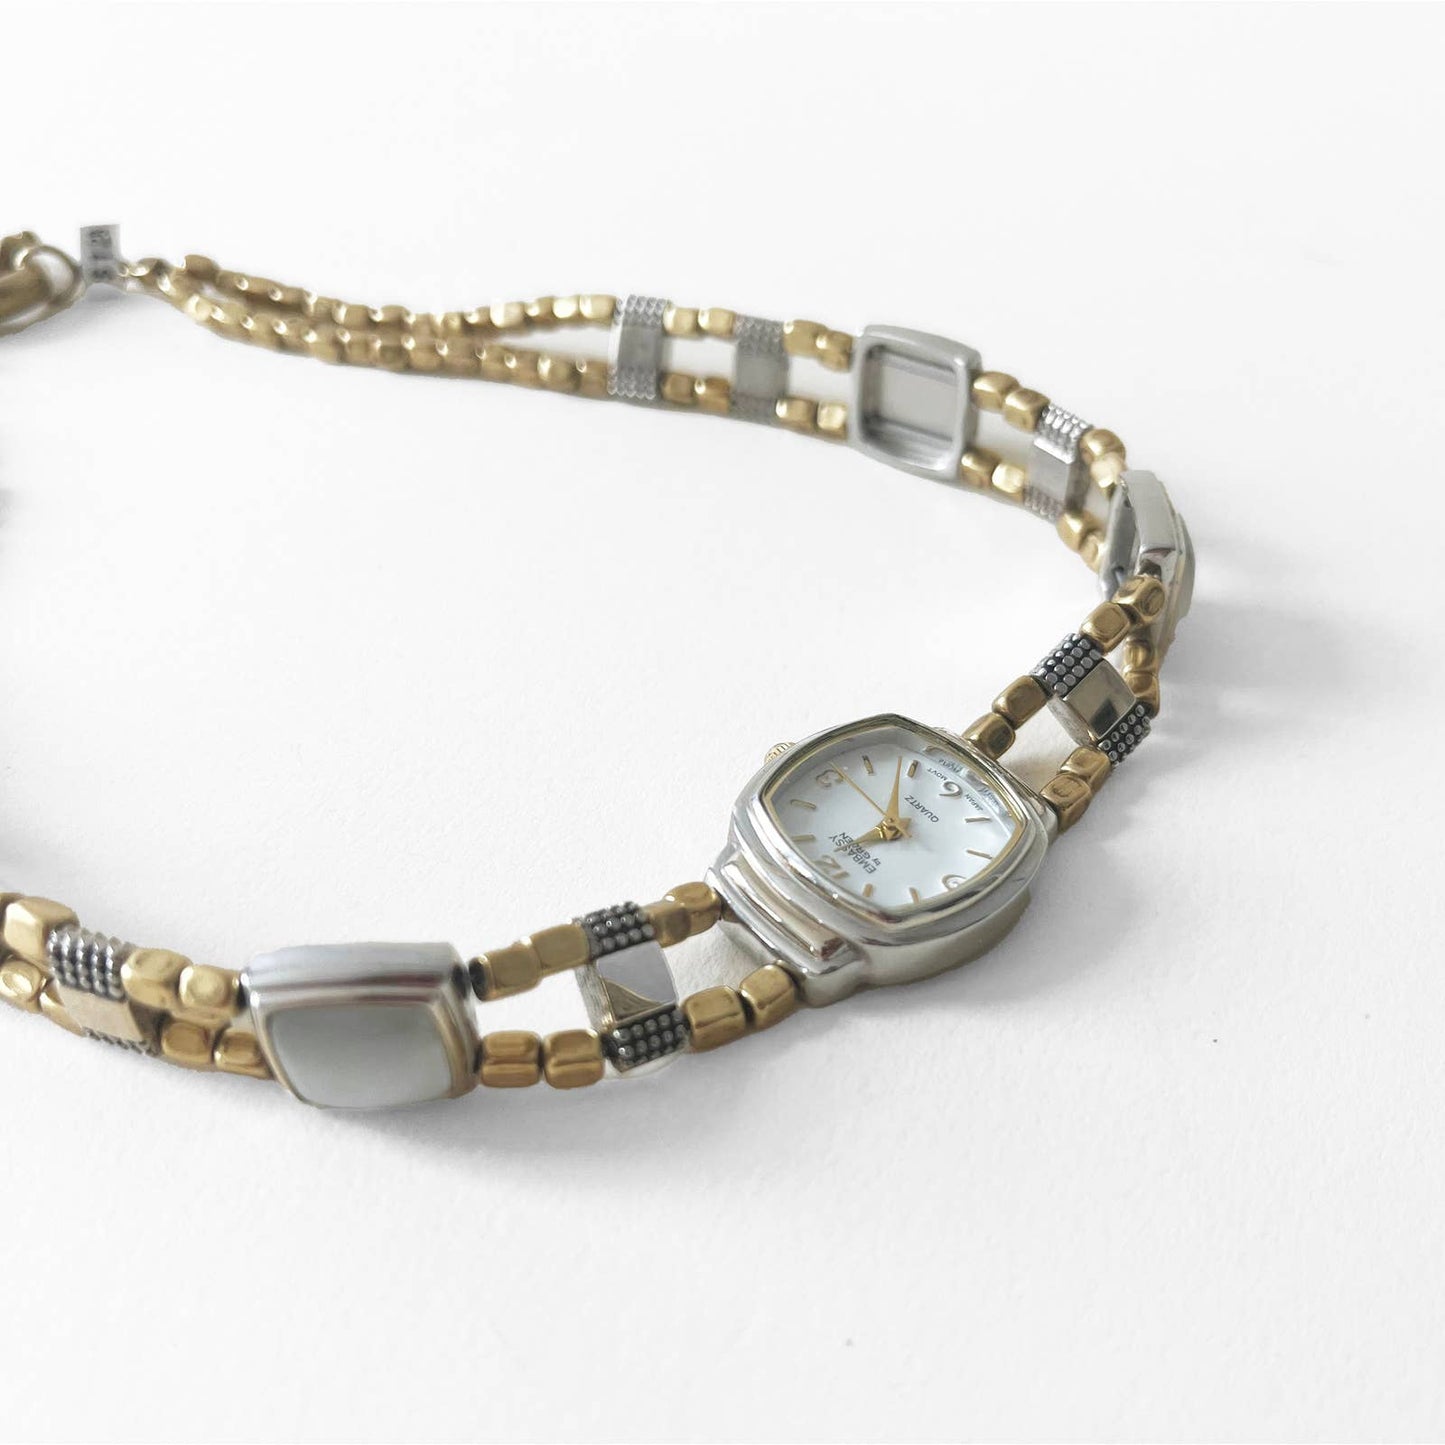 Watch Necklace | Vintage One of a Kind Watch Choker with Brass and Silver Details